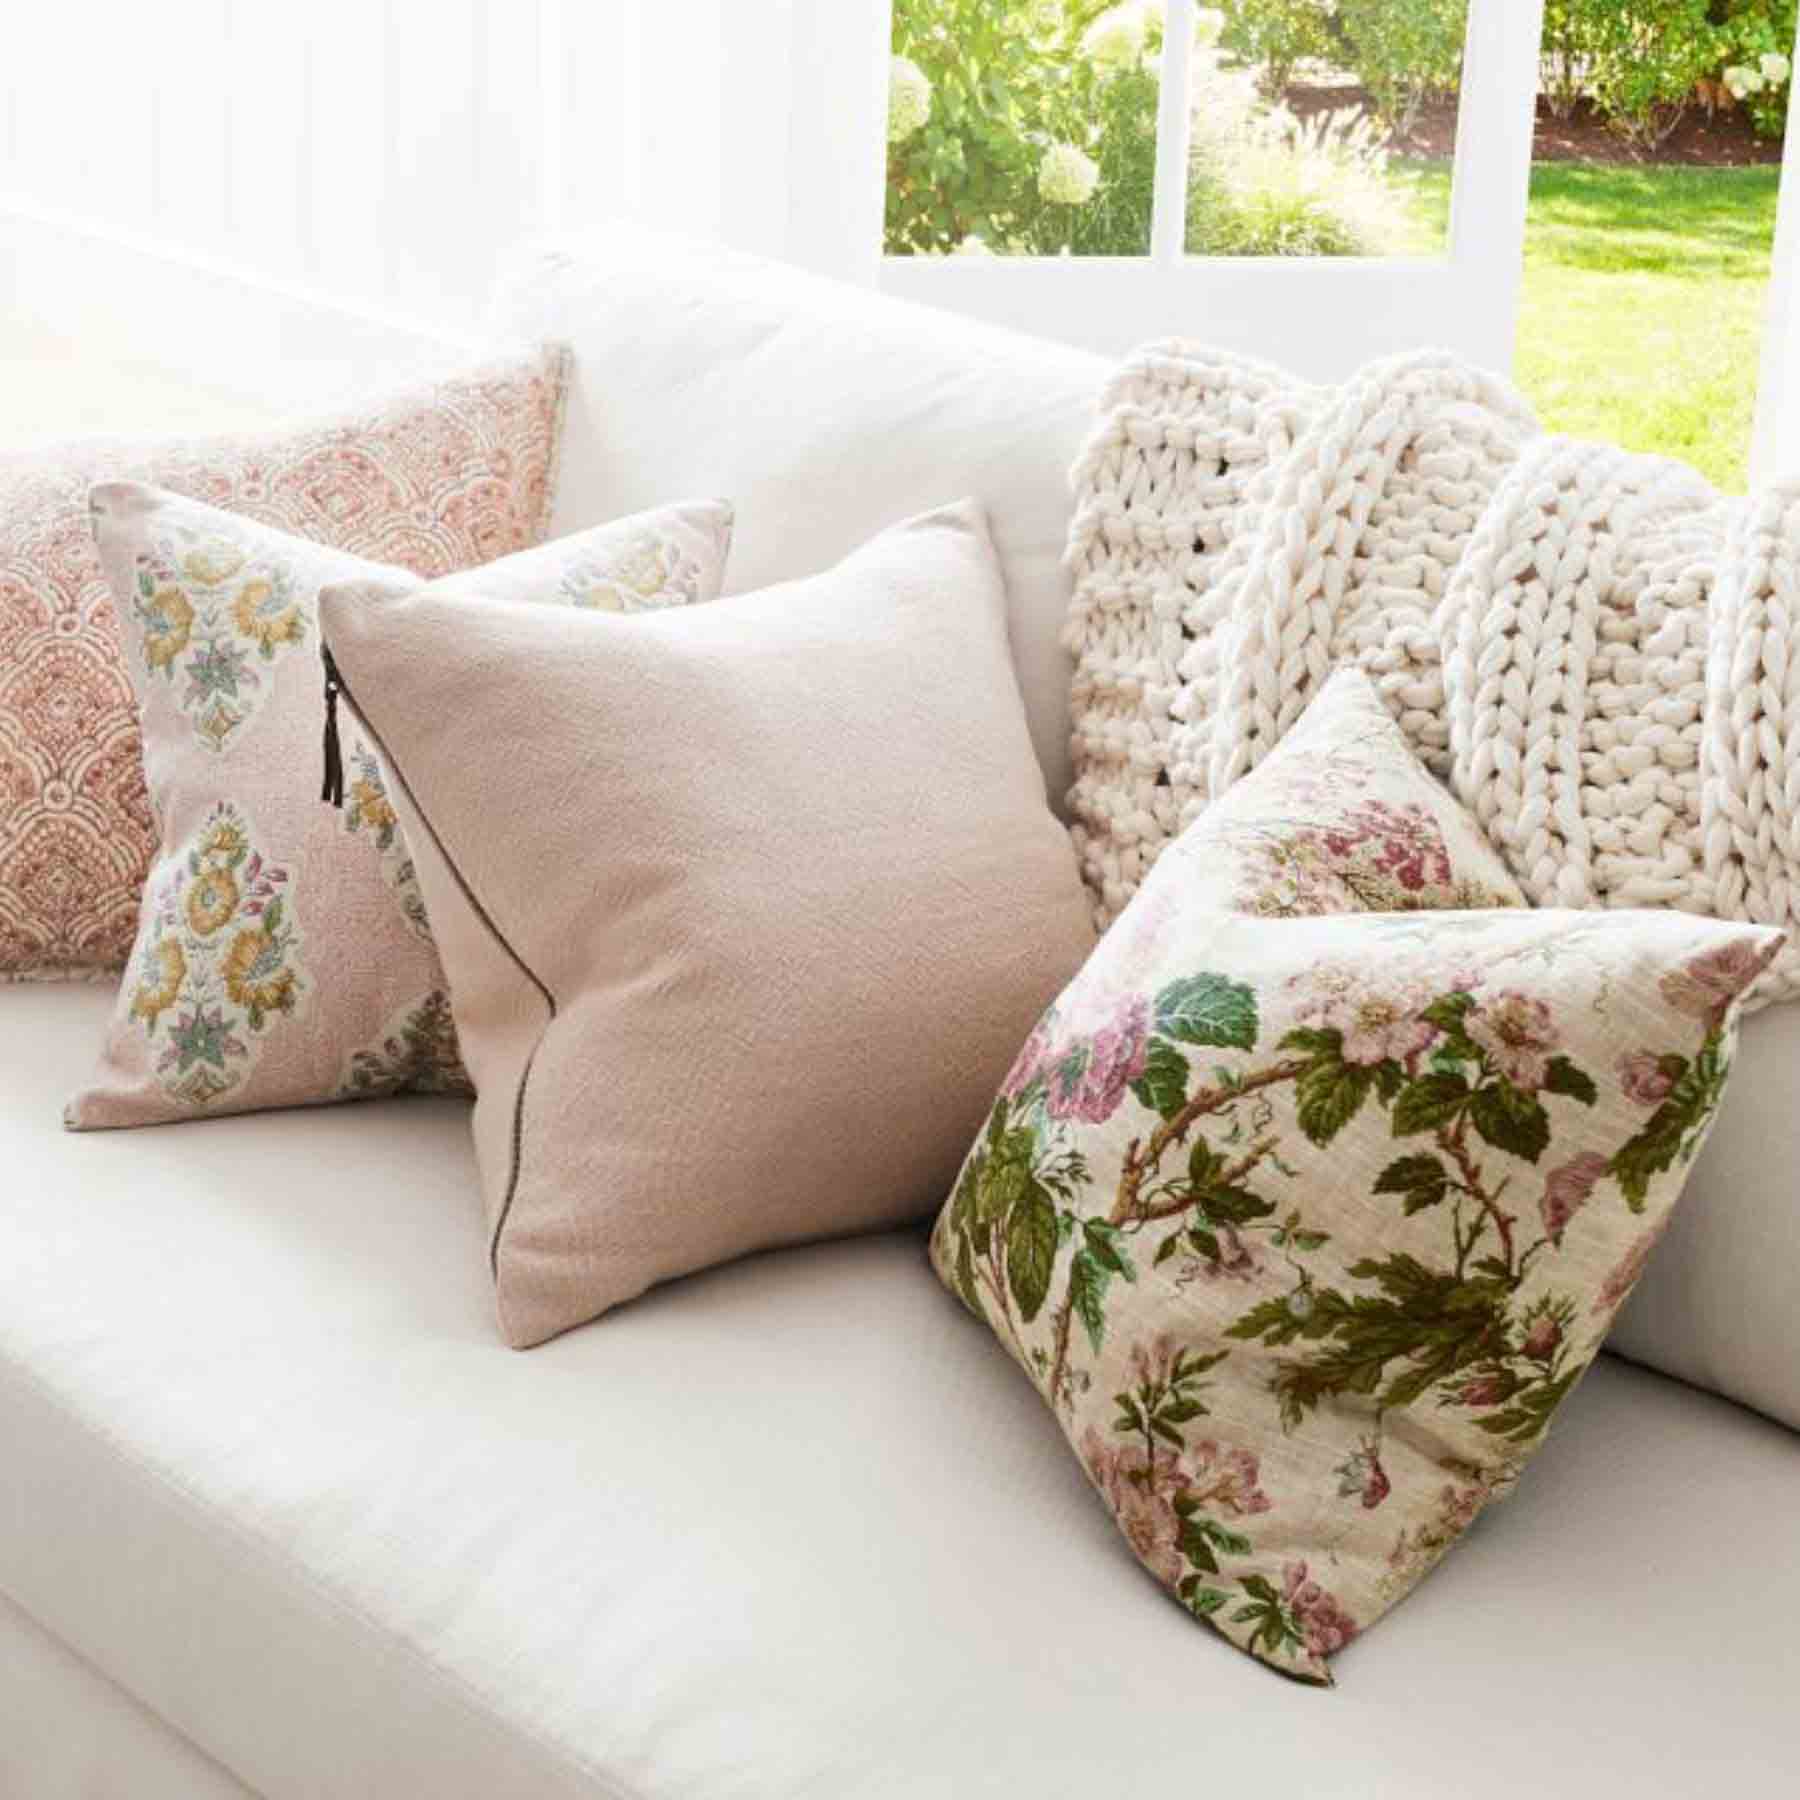 just adding a few floral cushions has already injected a fresh and lively ambiance into the room